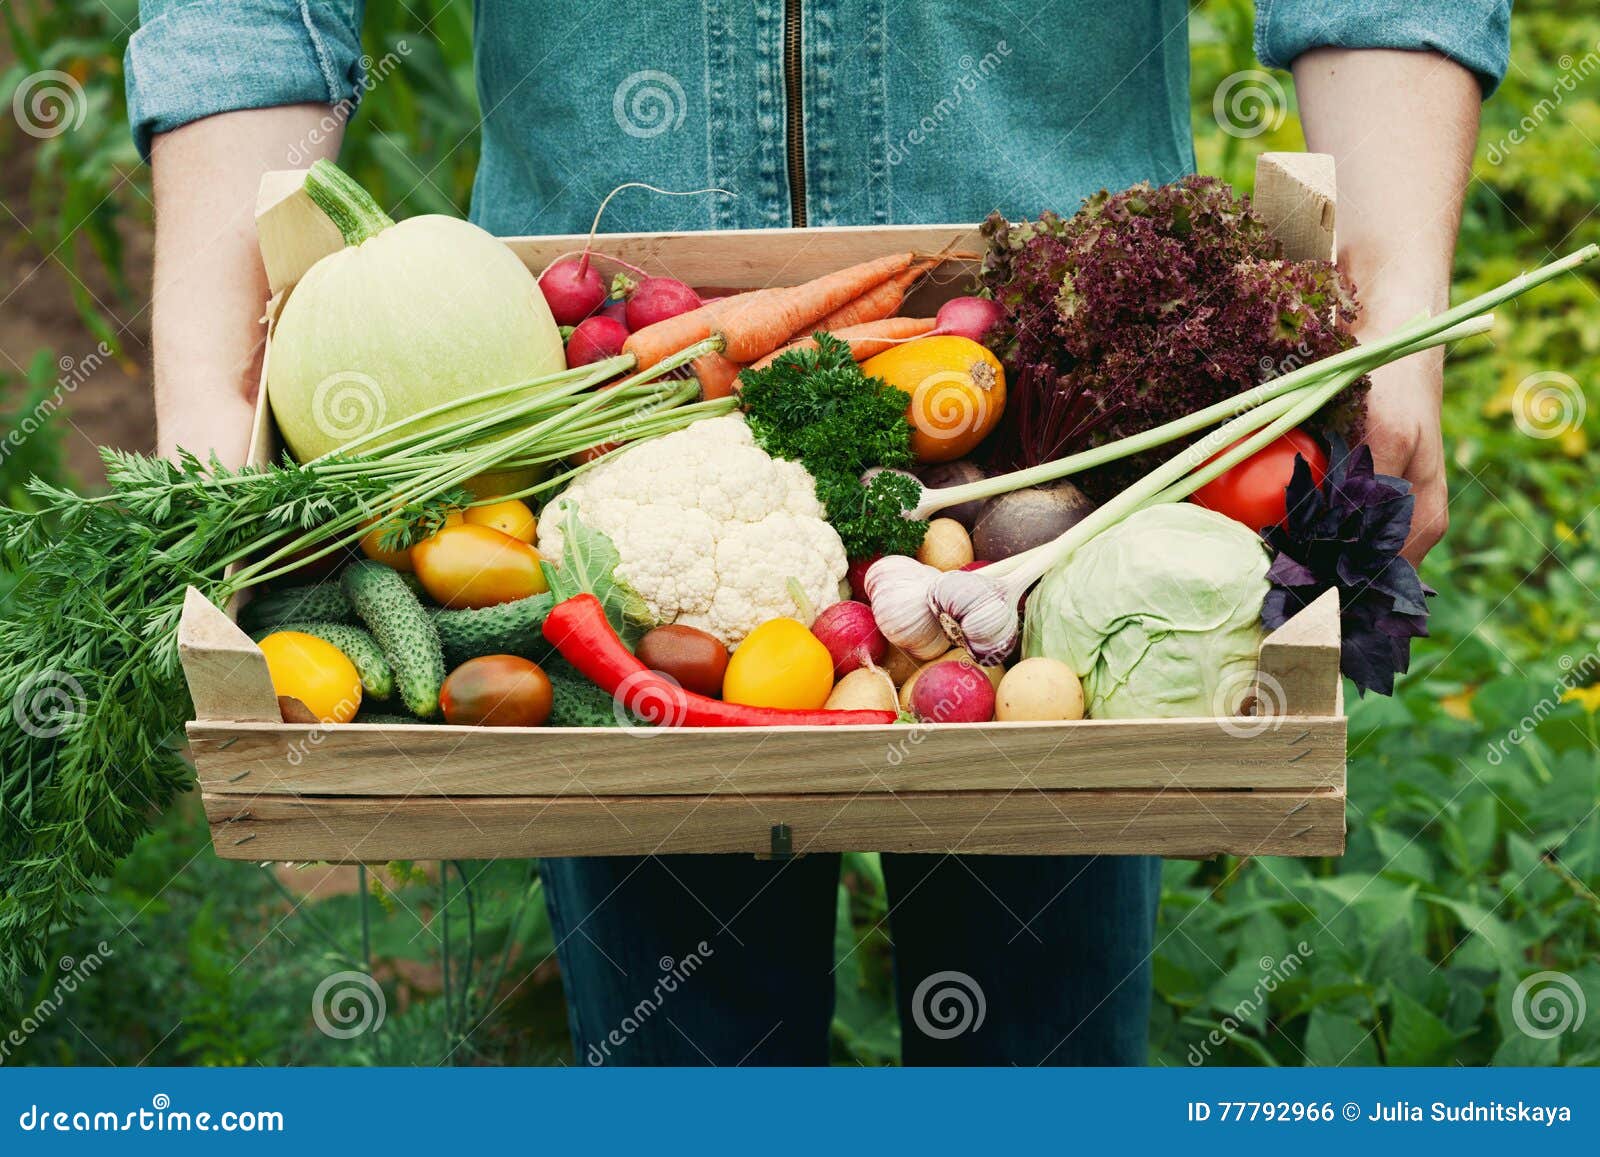 farmer holding a basket full of harvest organic vegetables and root in the garden. autumn holiday thanksgiving.